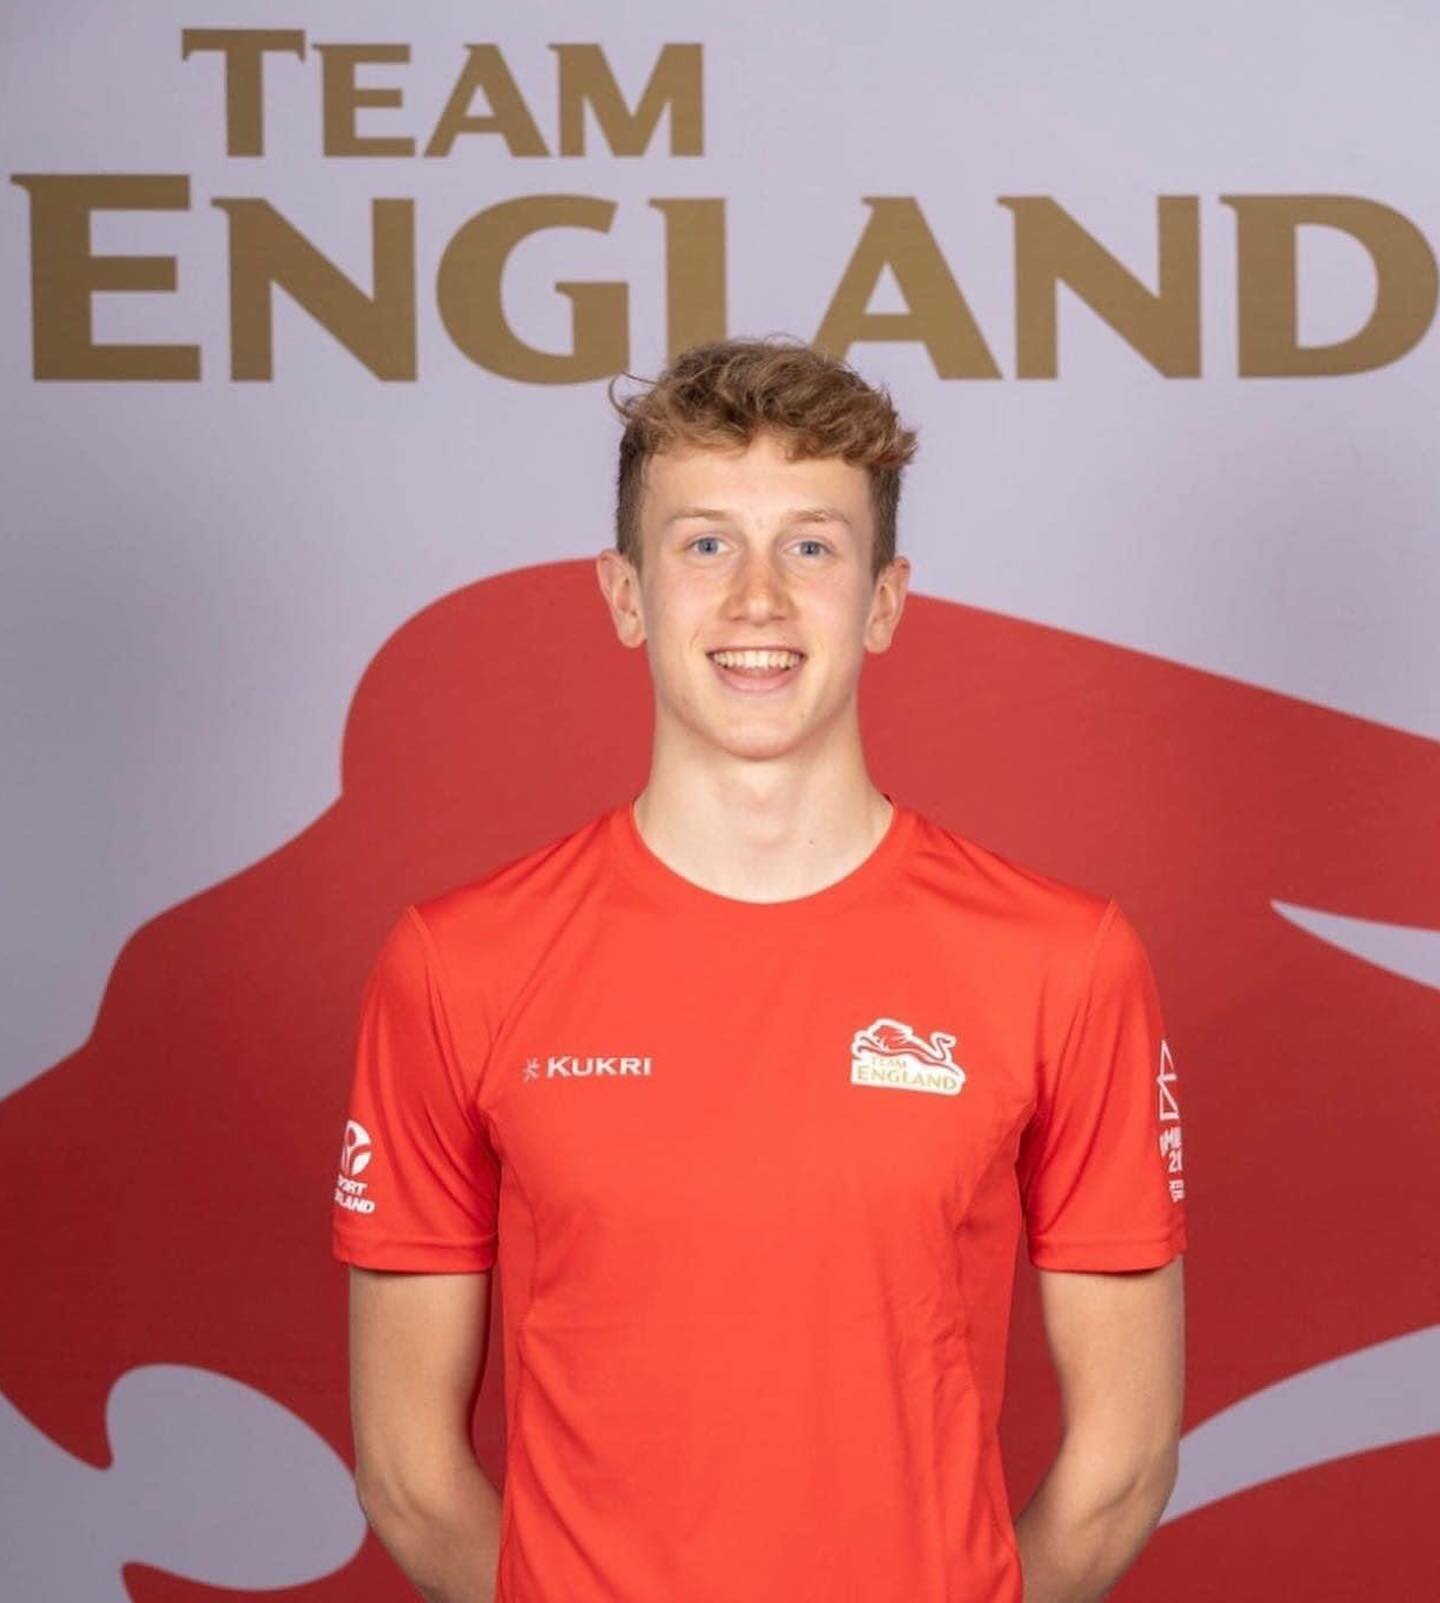 💚💛 Commonwealth Games 💚💛

Good luck to UoN Tri athlete Charlie Harding who is racing today as a guide for @oscar_kelly.tri .

The race starts at 11am and you can watch it live on the BBC. Great opportunity to watch some para triathlon if you have